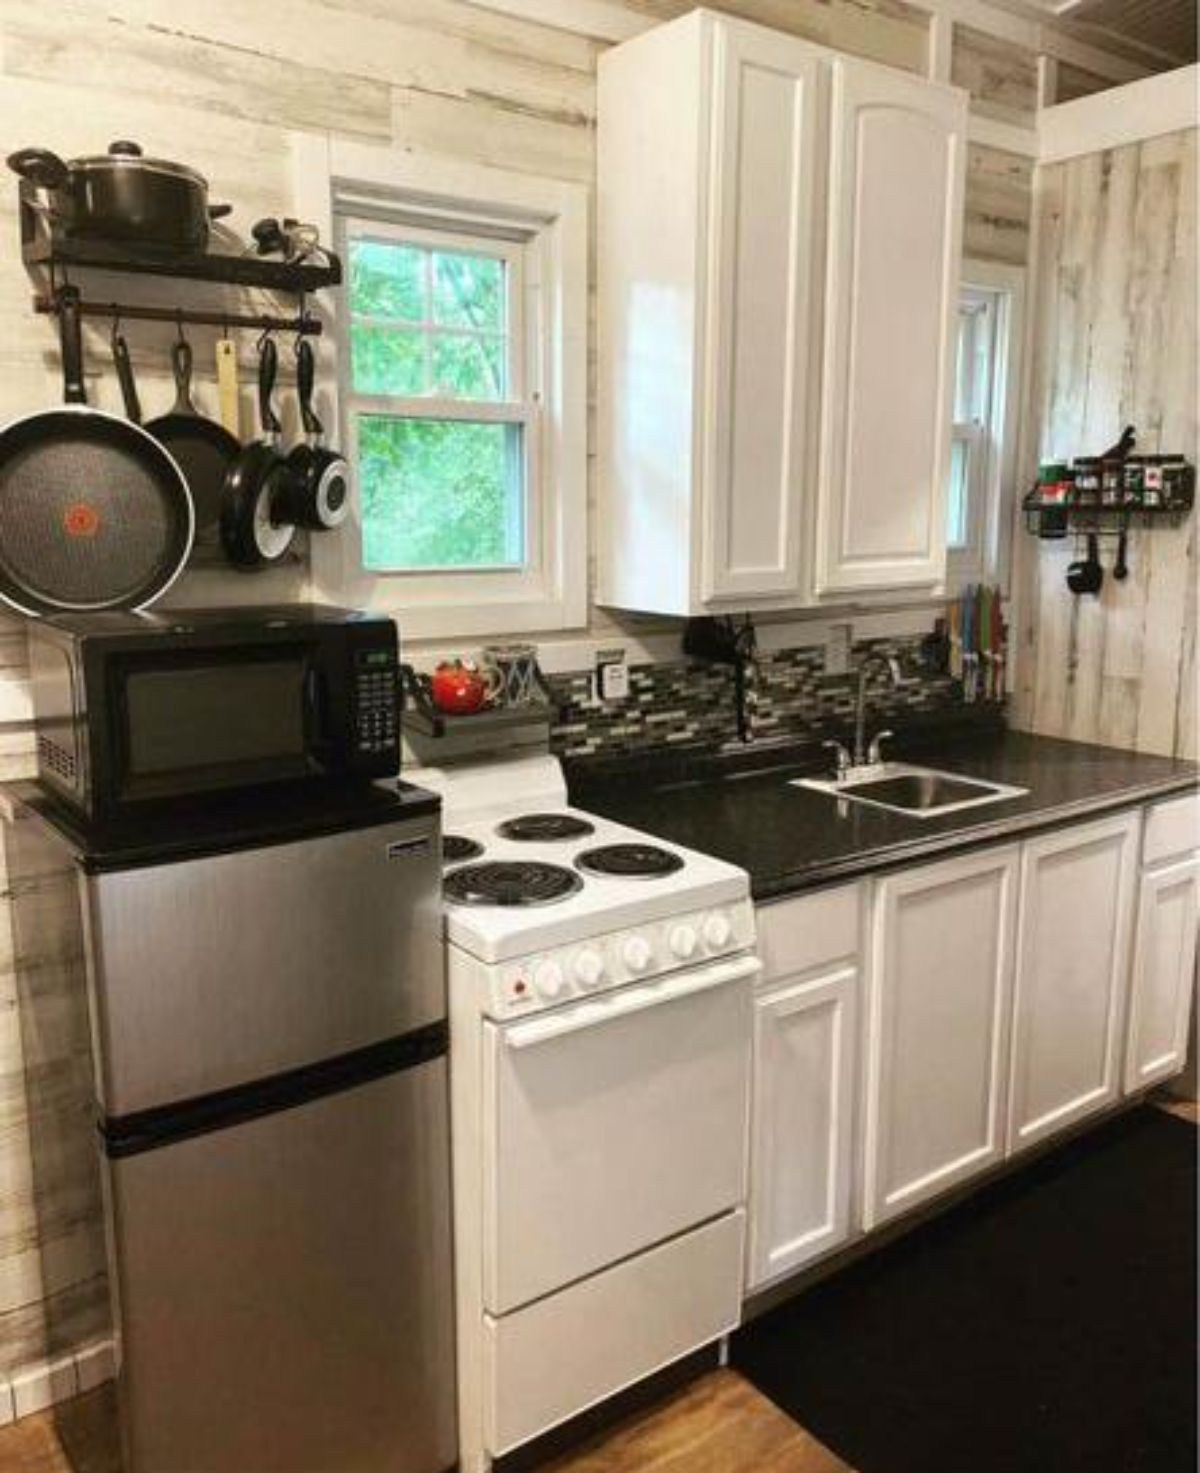 Kitchen area is equipped with propane gas burner, marble counter top, sink, refrigerator and microwave oven